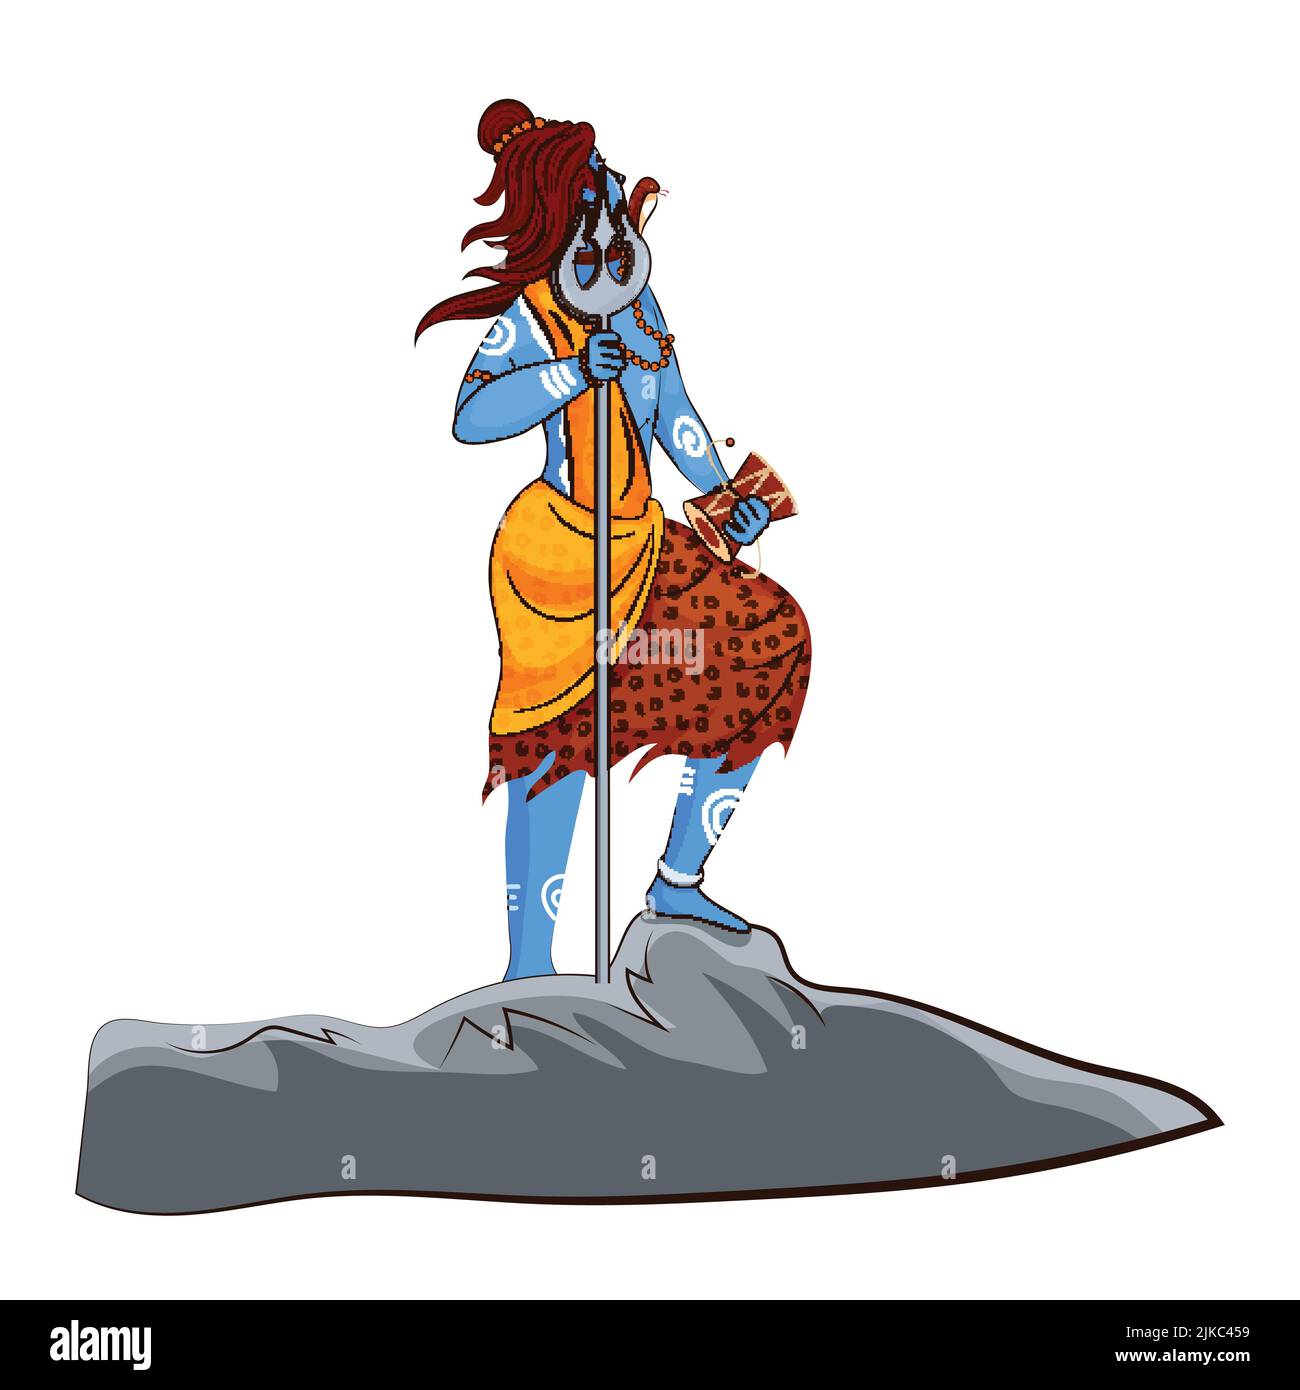 Lord shiva Cut Out Stock Images & Pictures - Alamy